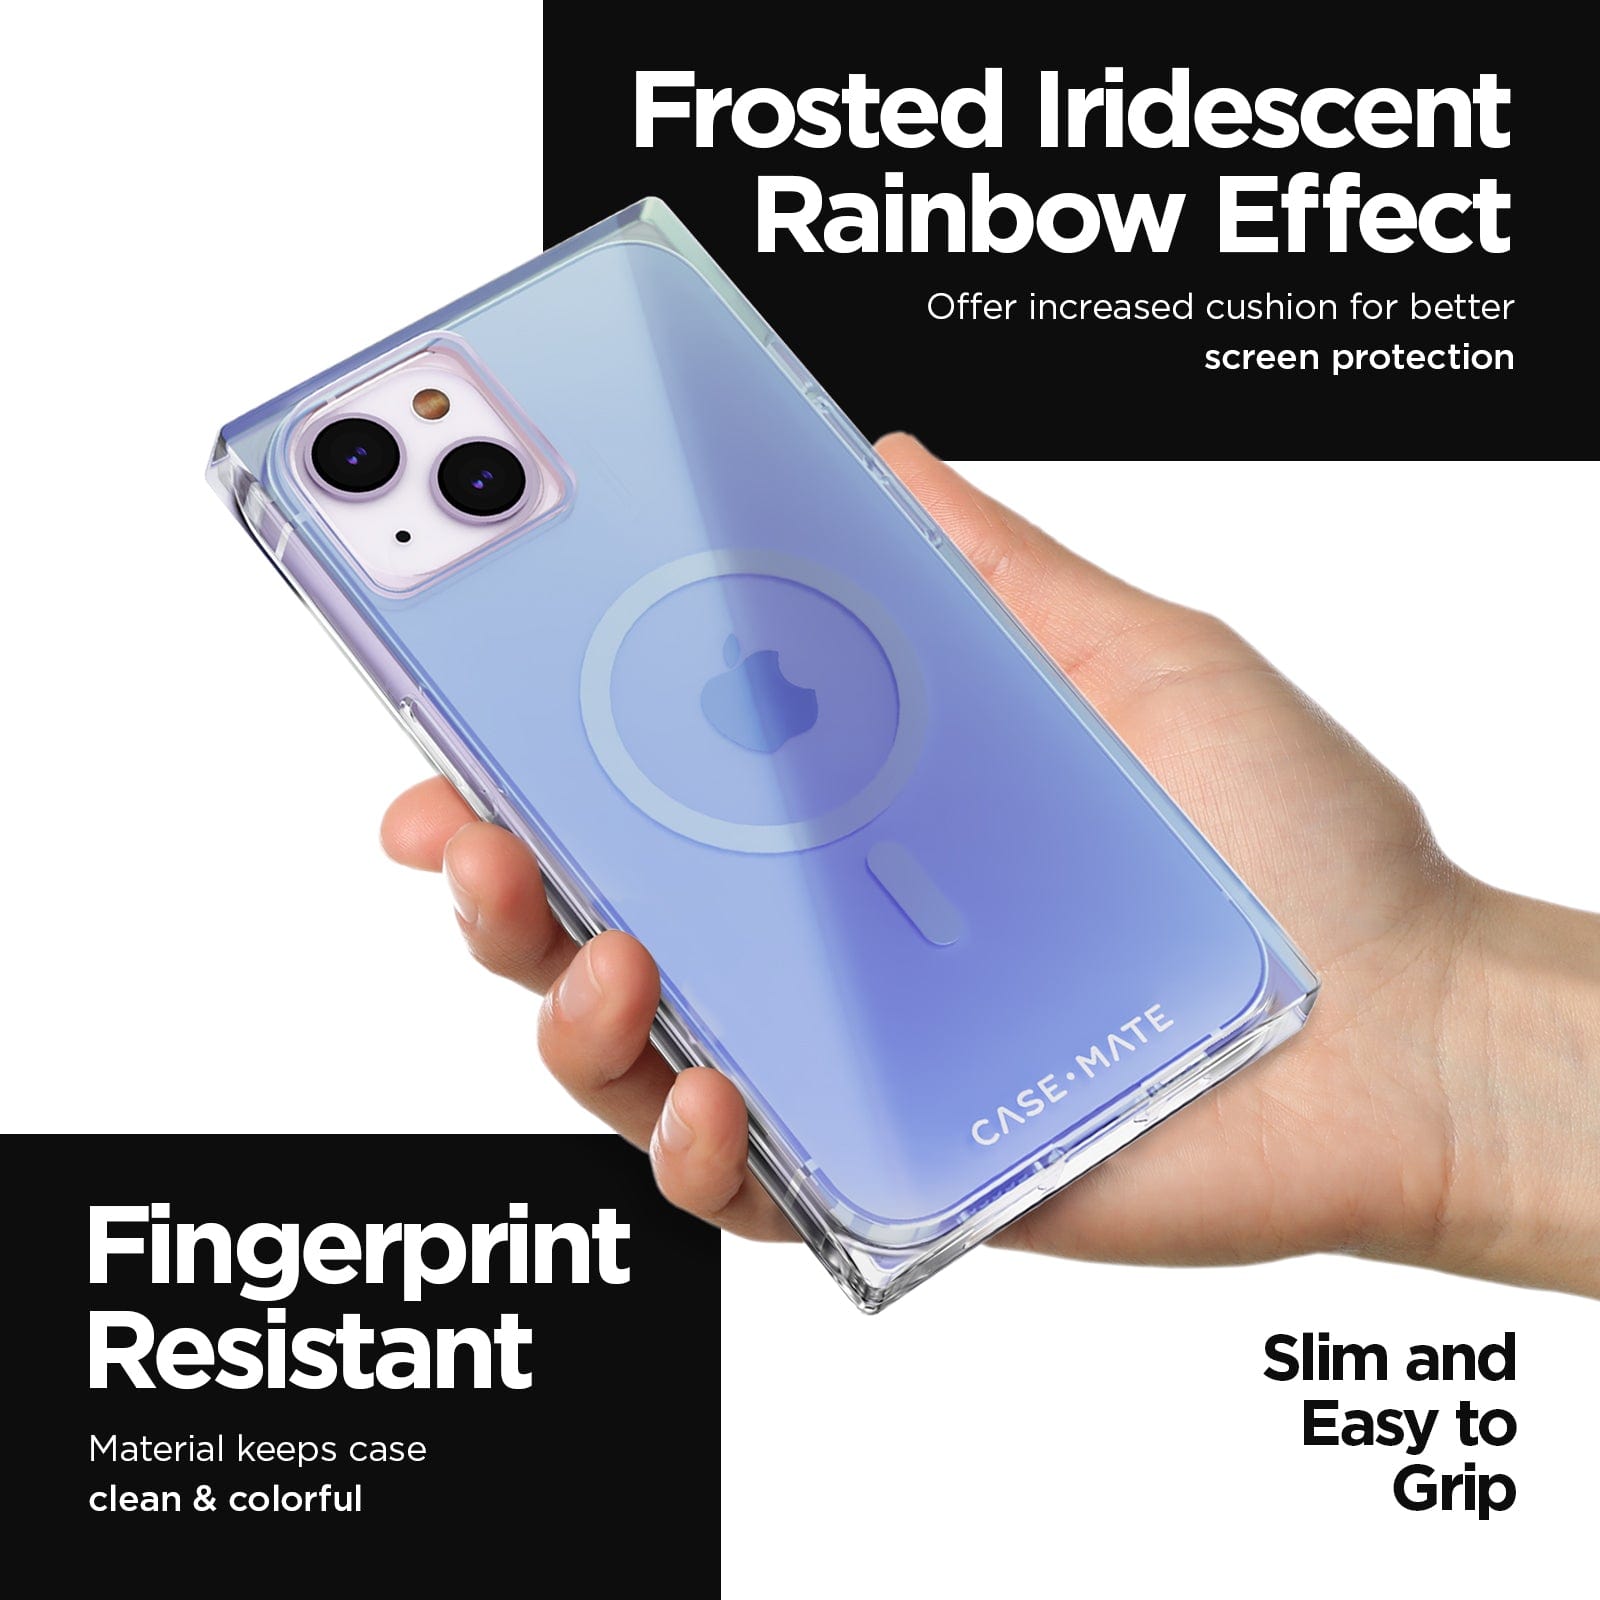 FROSTD IRIDESCENT RAINBOW EFFECT OFFER INCREASED CUSHION FOR BETTER SCREEN PROTECTION. FINGERPRINT RESISTANT MATERIAL KEEPS CASE CLEAN & COLORFUL. SLIM AND EASY TO GRIP.